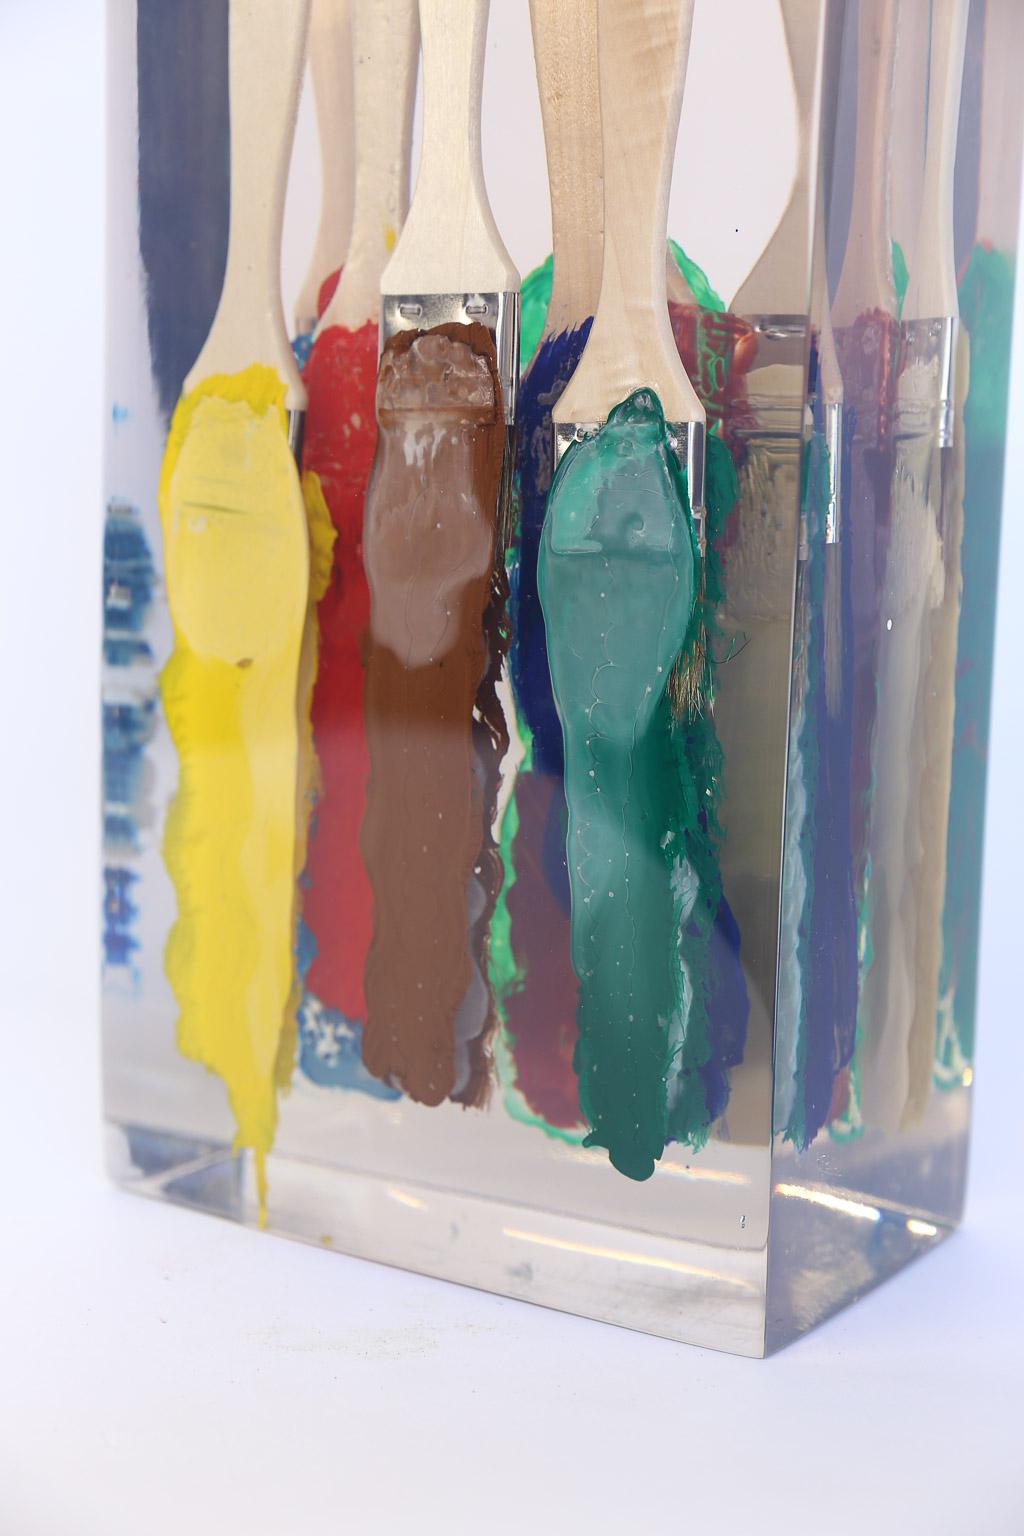 Add that touch of the unexpected with this whimsical art work of paint and paint brushes emerged in resin. With the free floating illusion of the brushes it is sure to start a conversation if placed in your home.